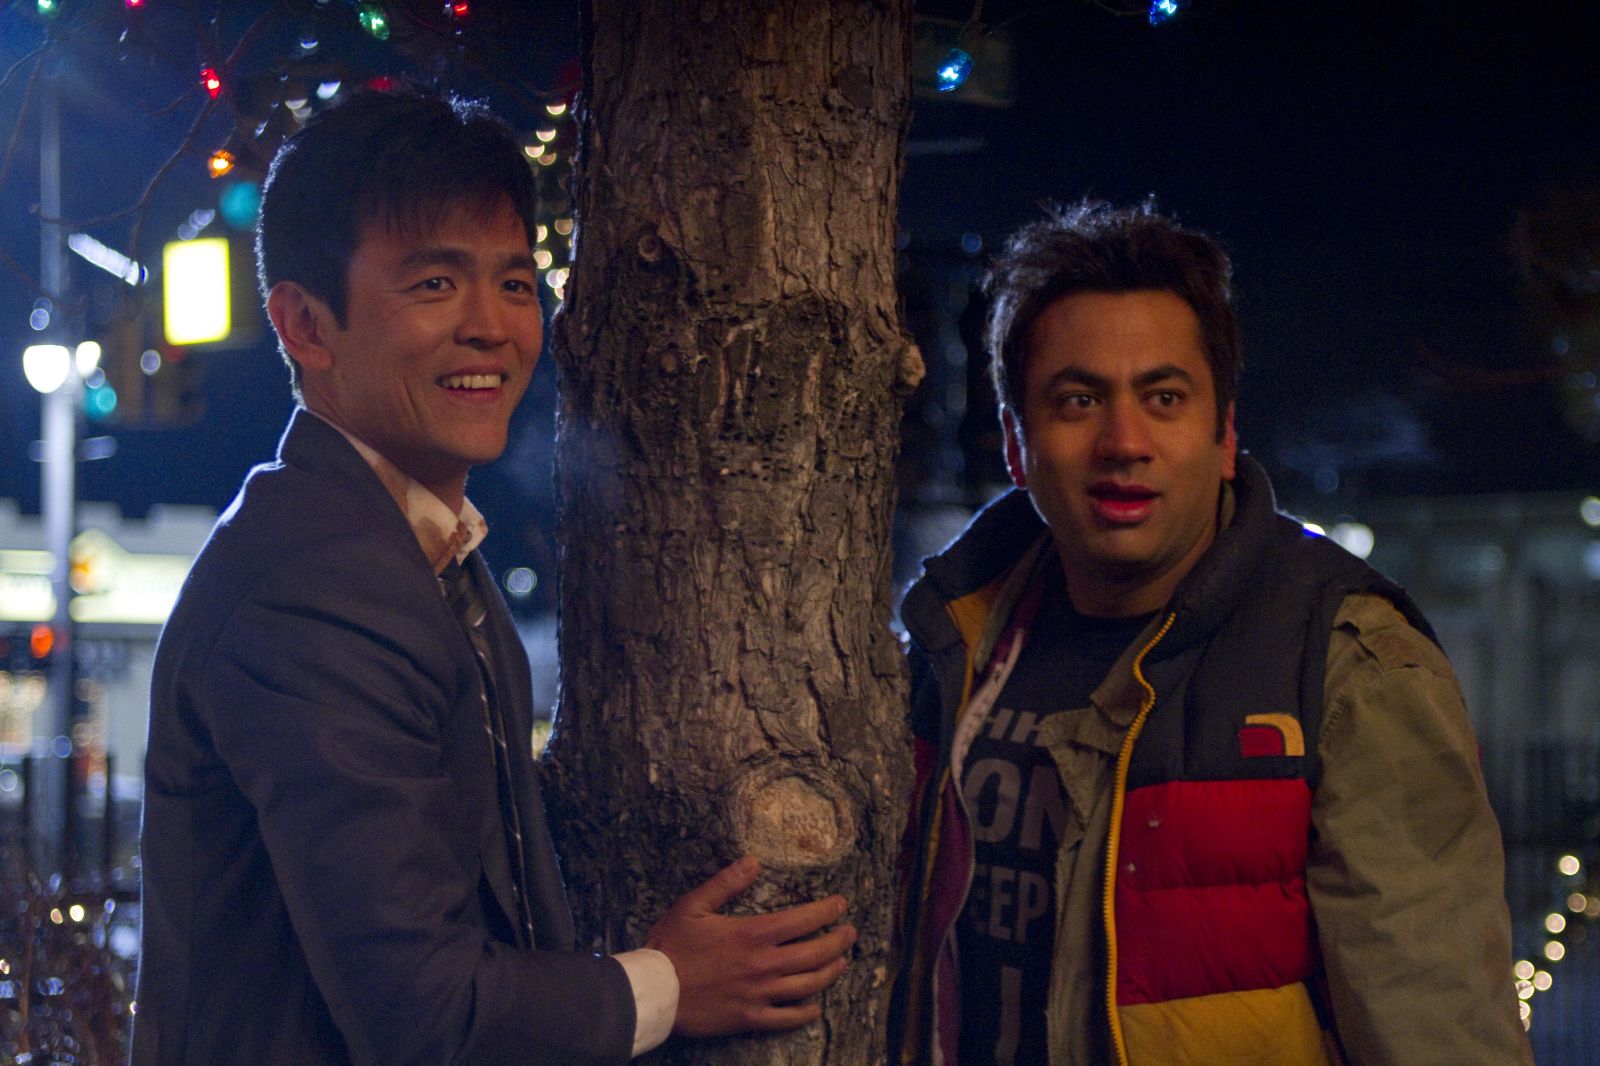 A Very Harold and Kumar Christmas Available on Blu-ray/DVD February 7th